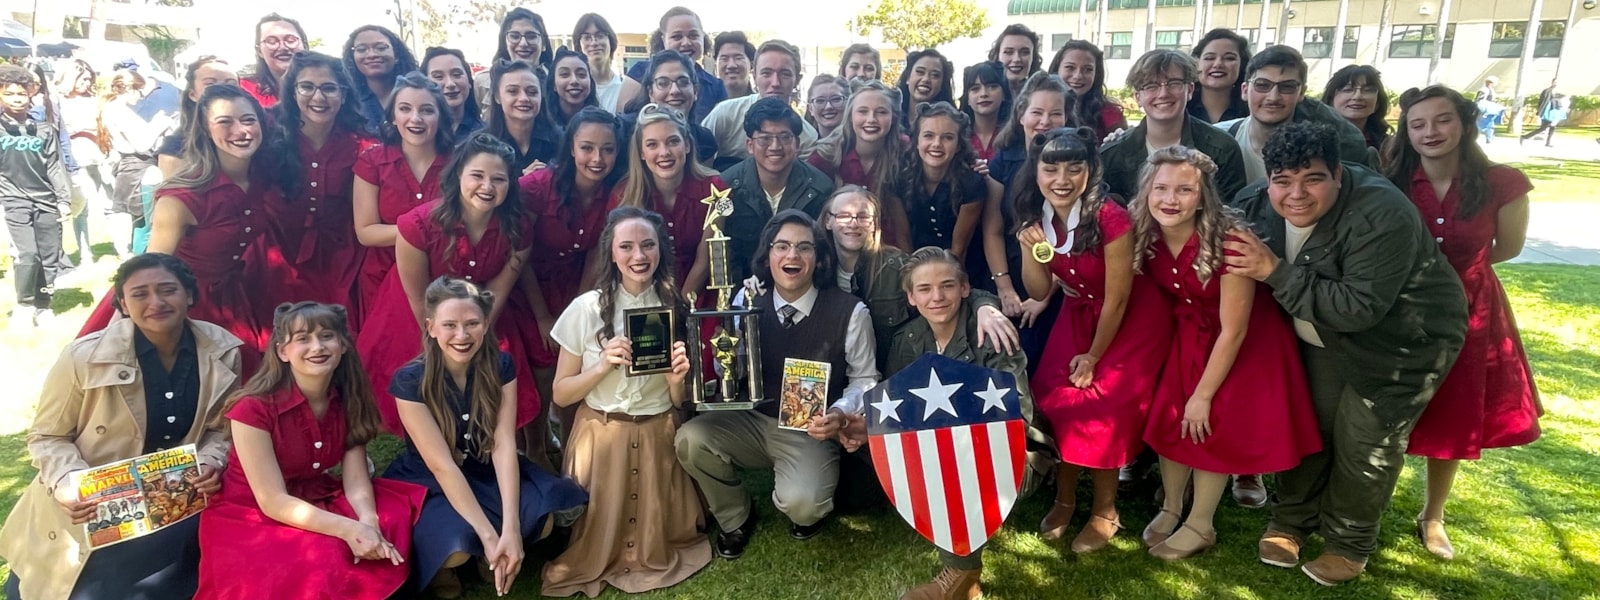 Show Choir Vocal Thunder with trophies earned at comp in CA